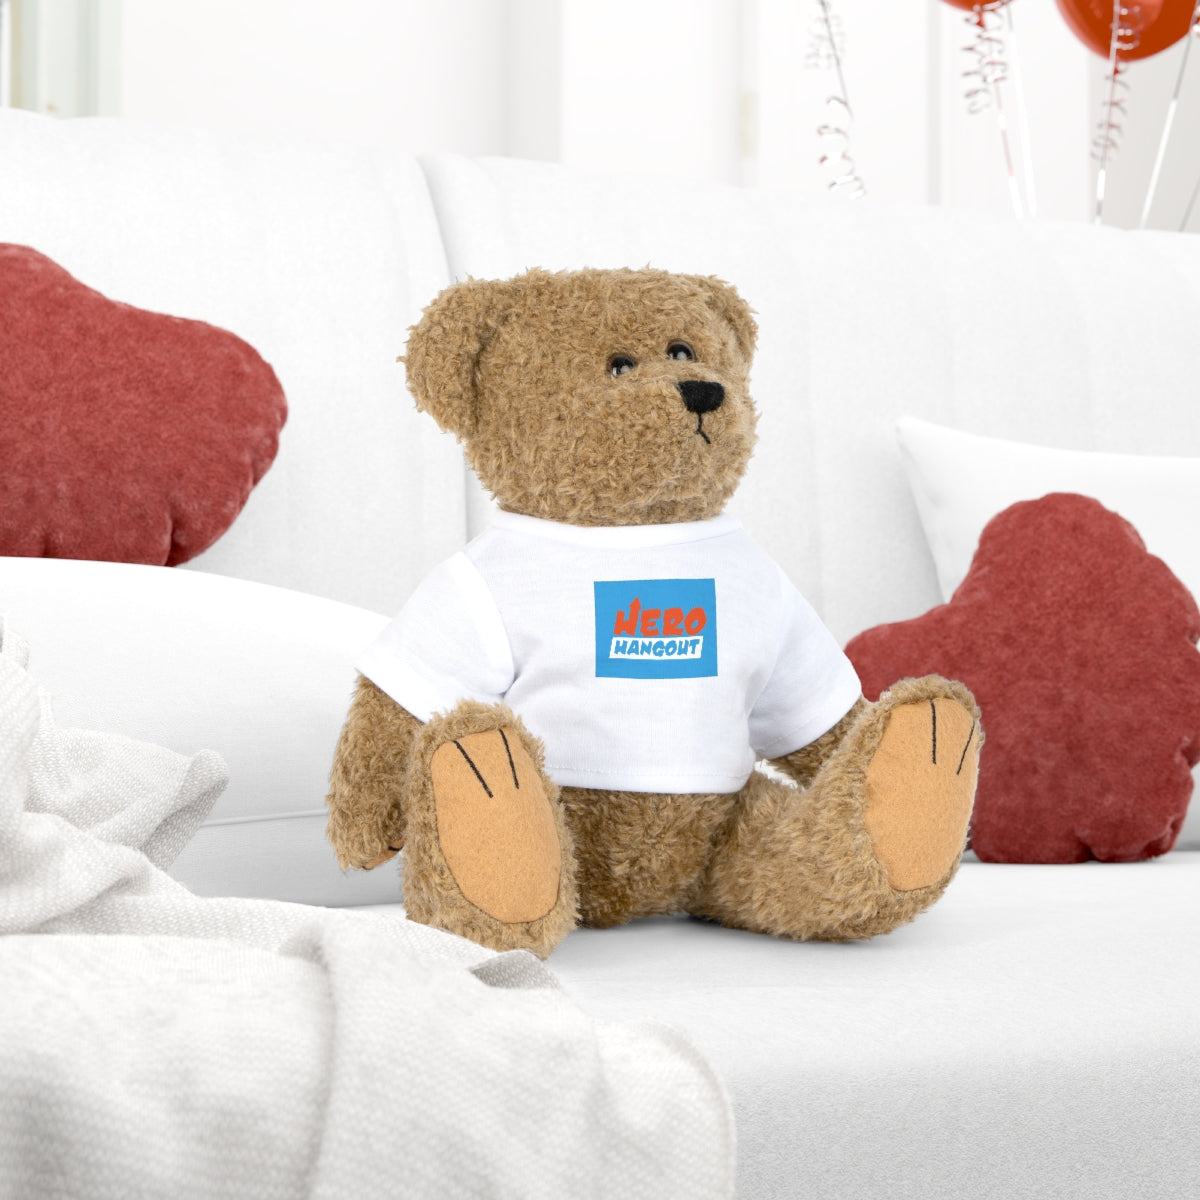 Plush Toy with HeroHangout T-Shirt